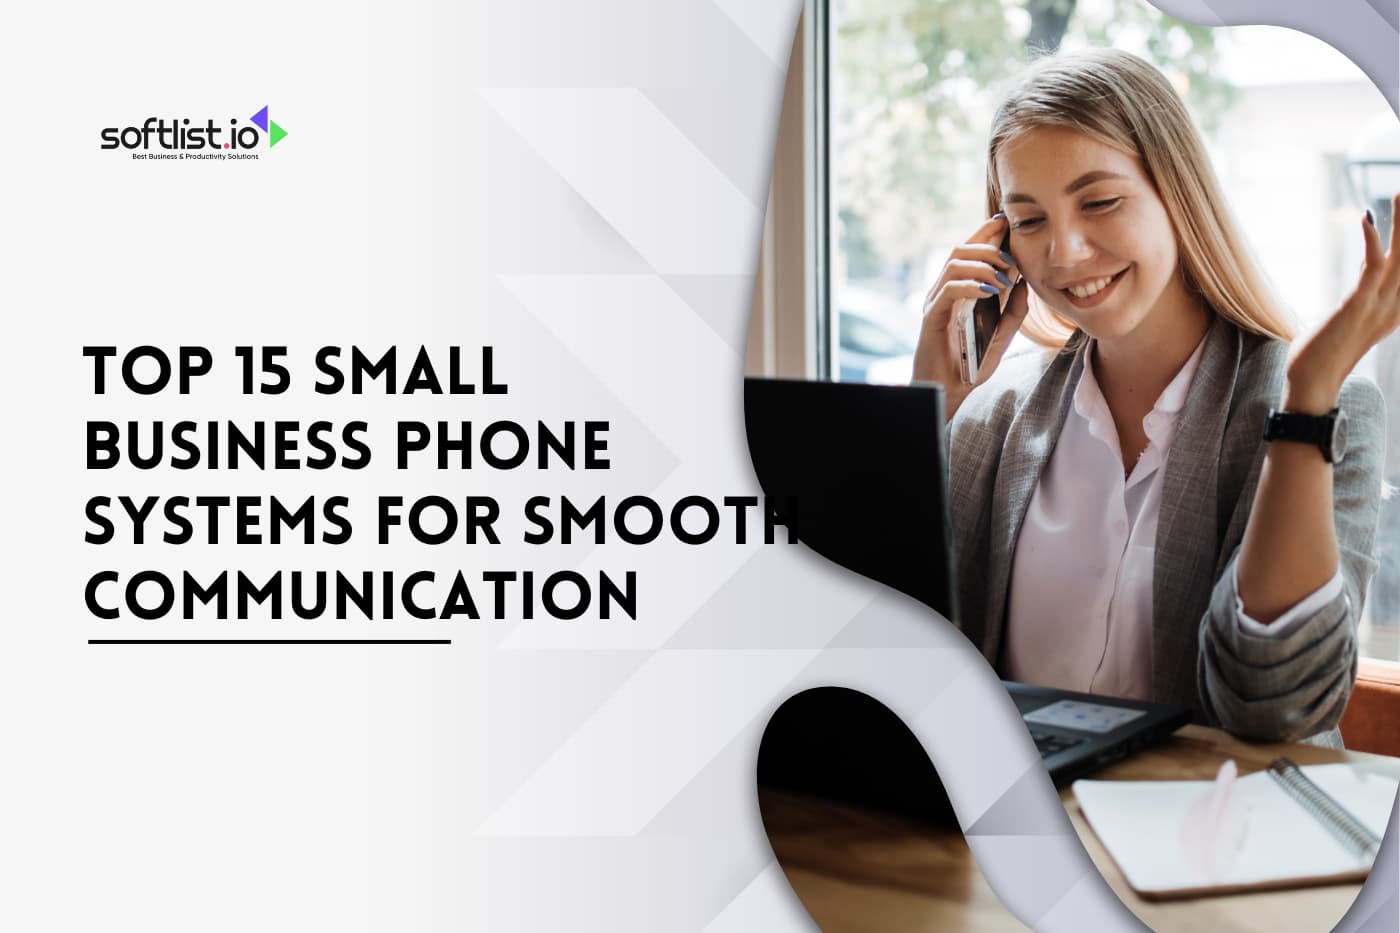 Top 15 Small Business Phone Systems for Smooth Communication